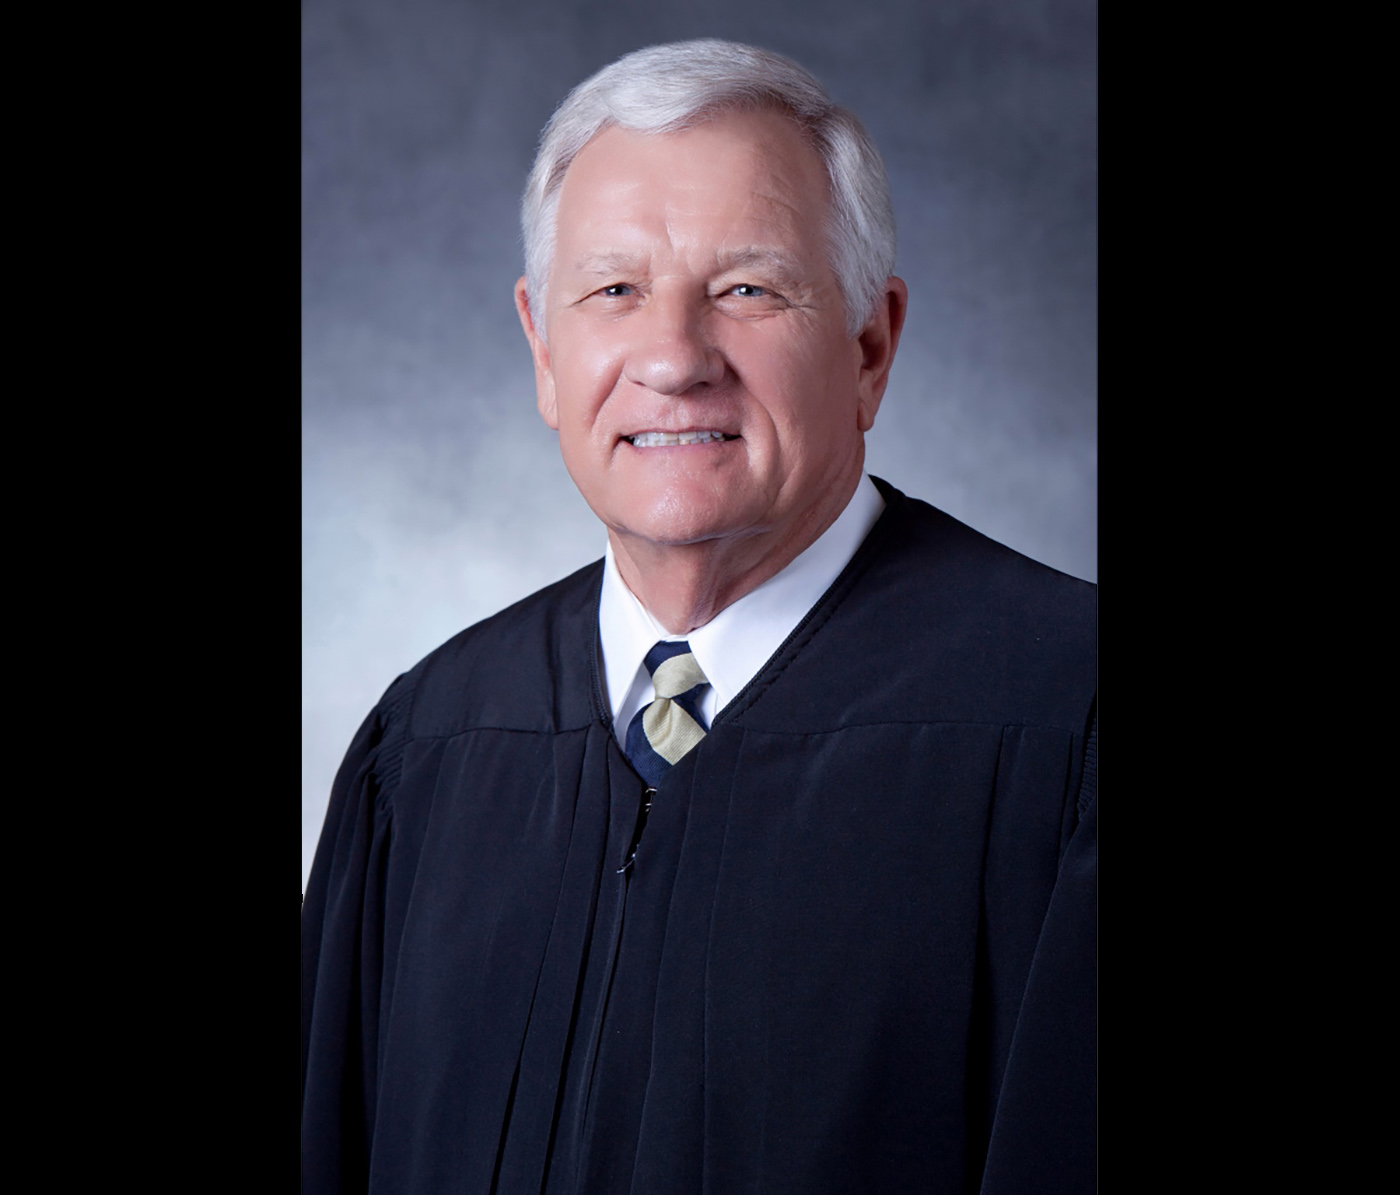 Gray-haired man wearing judge's robes.